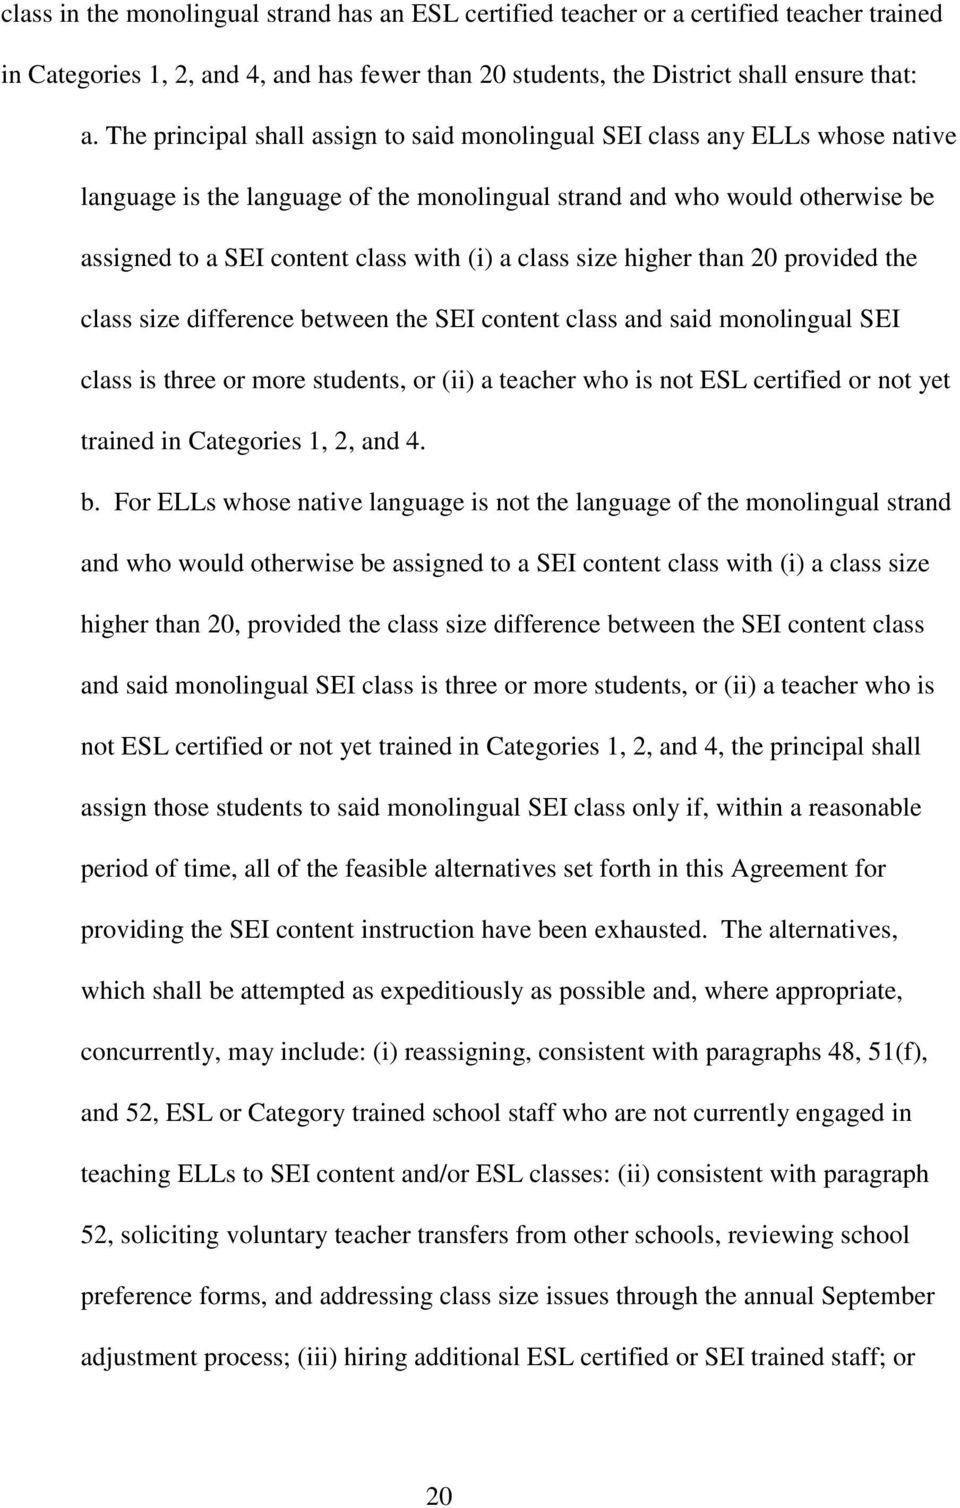 class size higher than 20 provided the class size difference between the SEI content class and said monolingual SEI class is three or more students, or (ii) a teacher who is not ESL certified or not